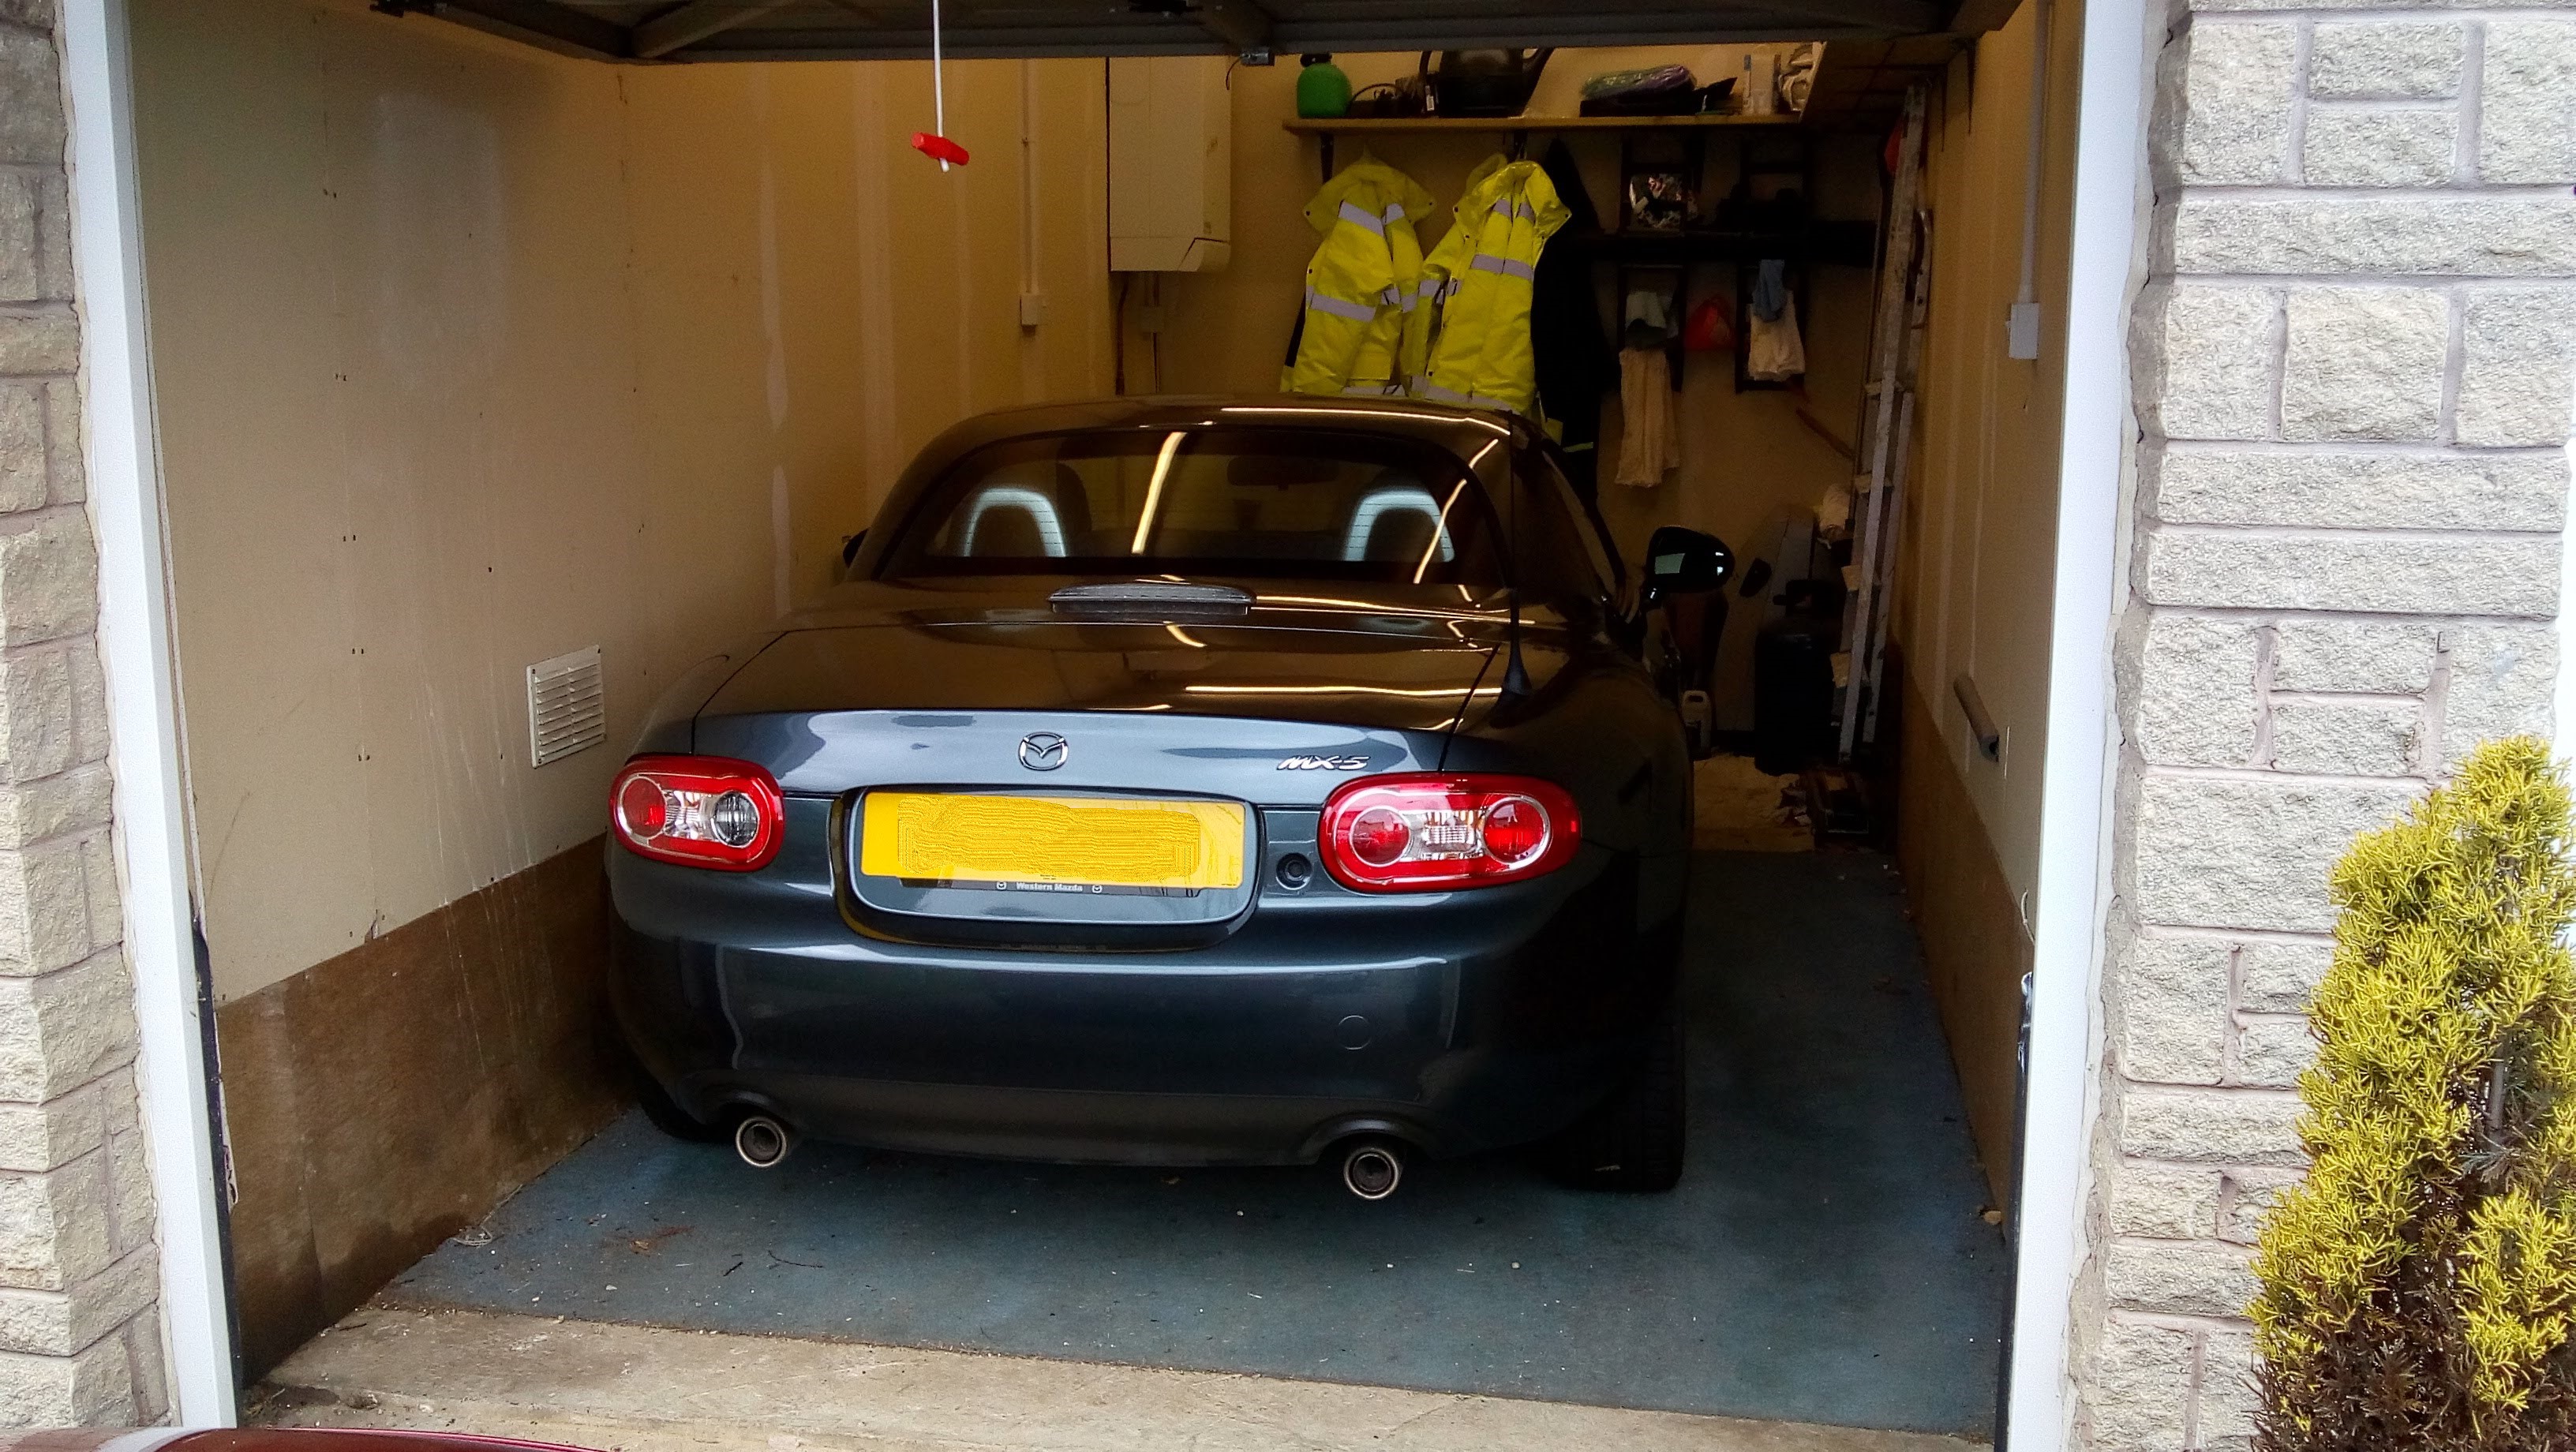 Why are new build garages so small? - Page 6 - Homes, Gardens and DIY - PistonHeads UK